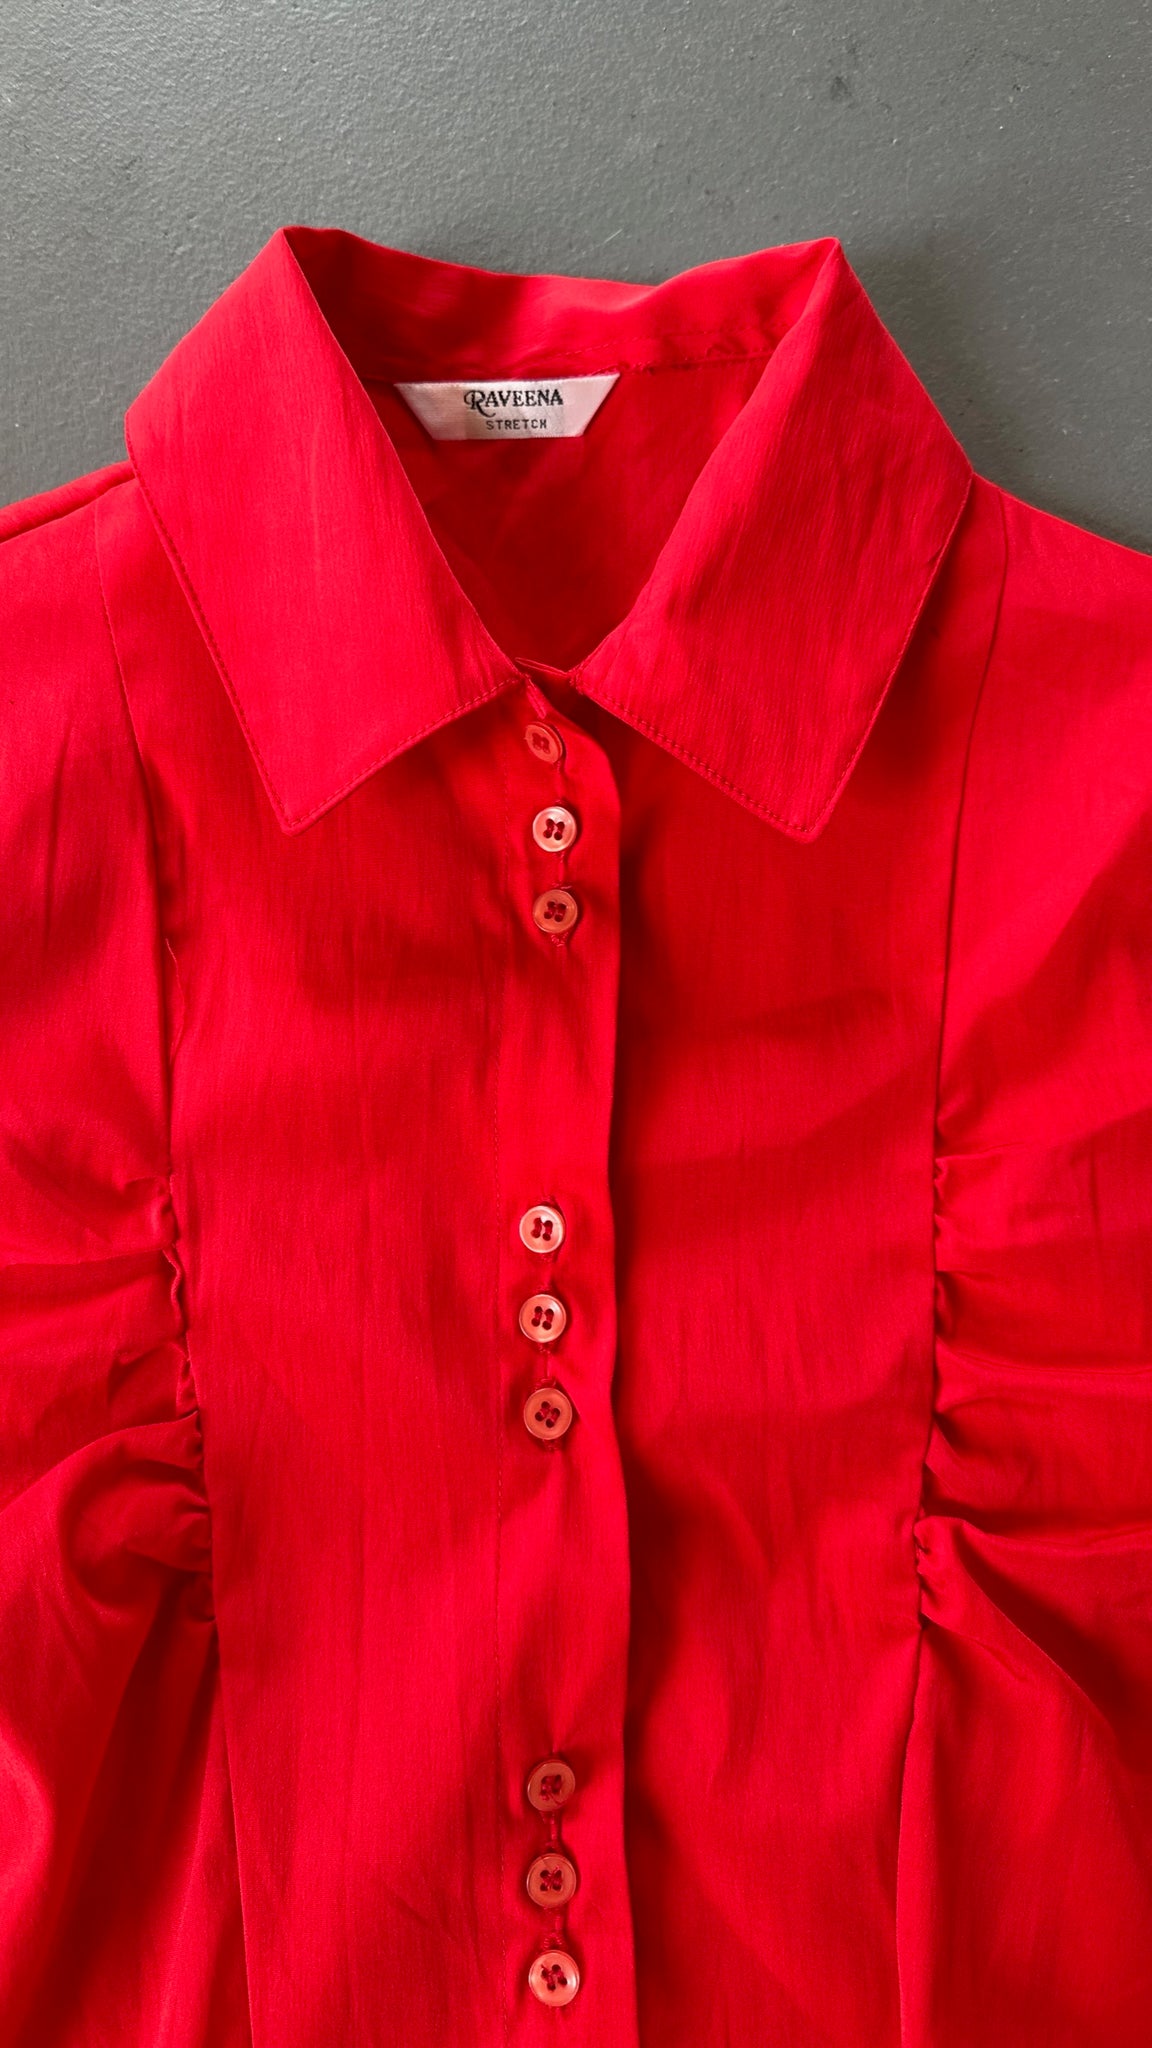 Red Raveena Stretchy Short Sleeve Ruched Button Down (XS)